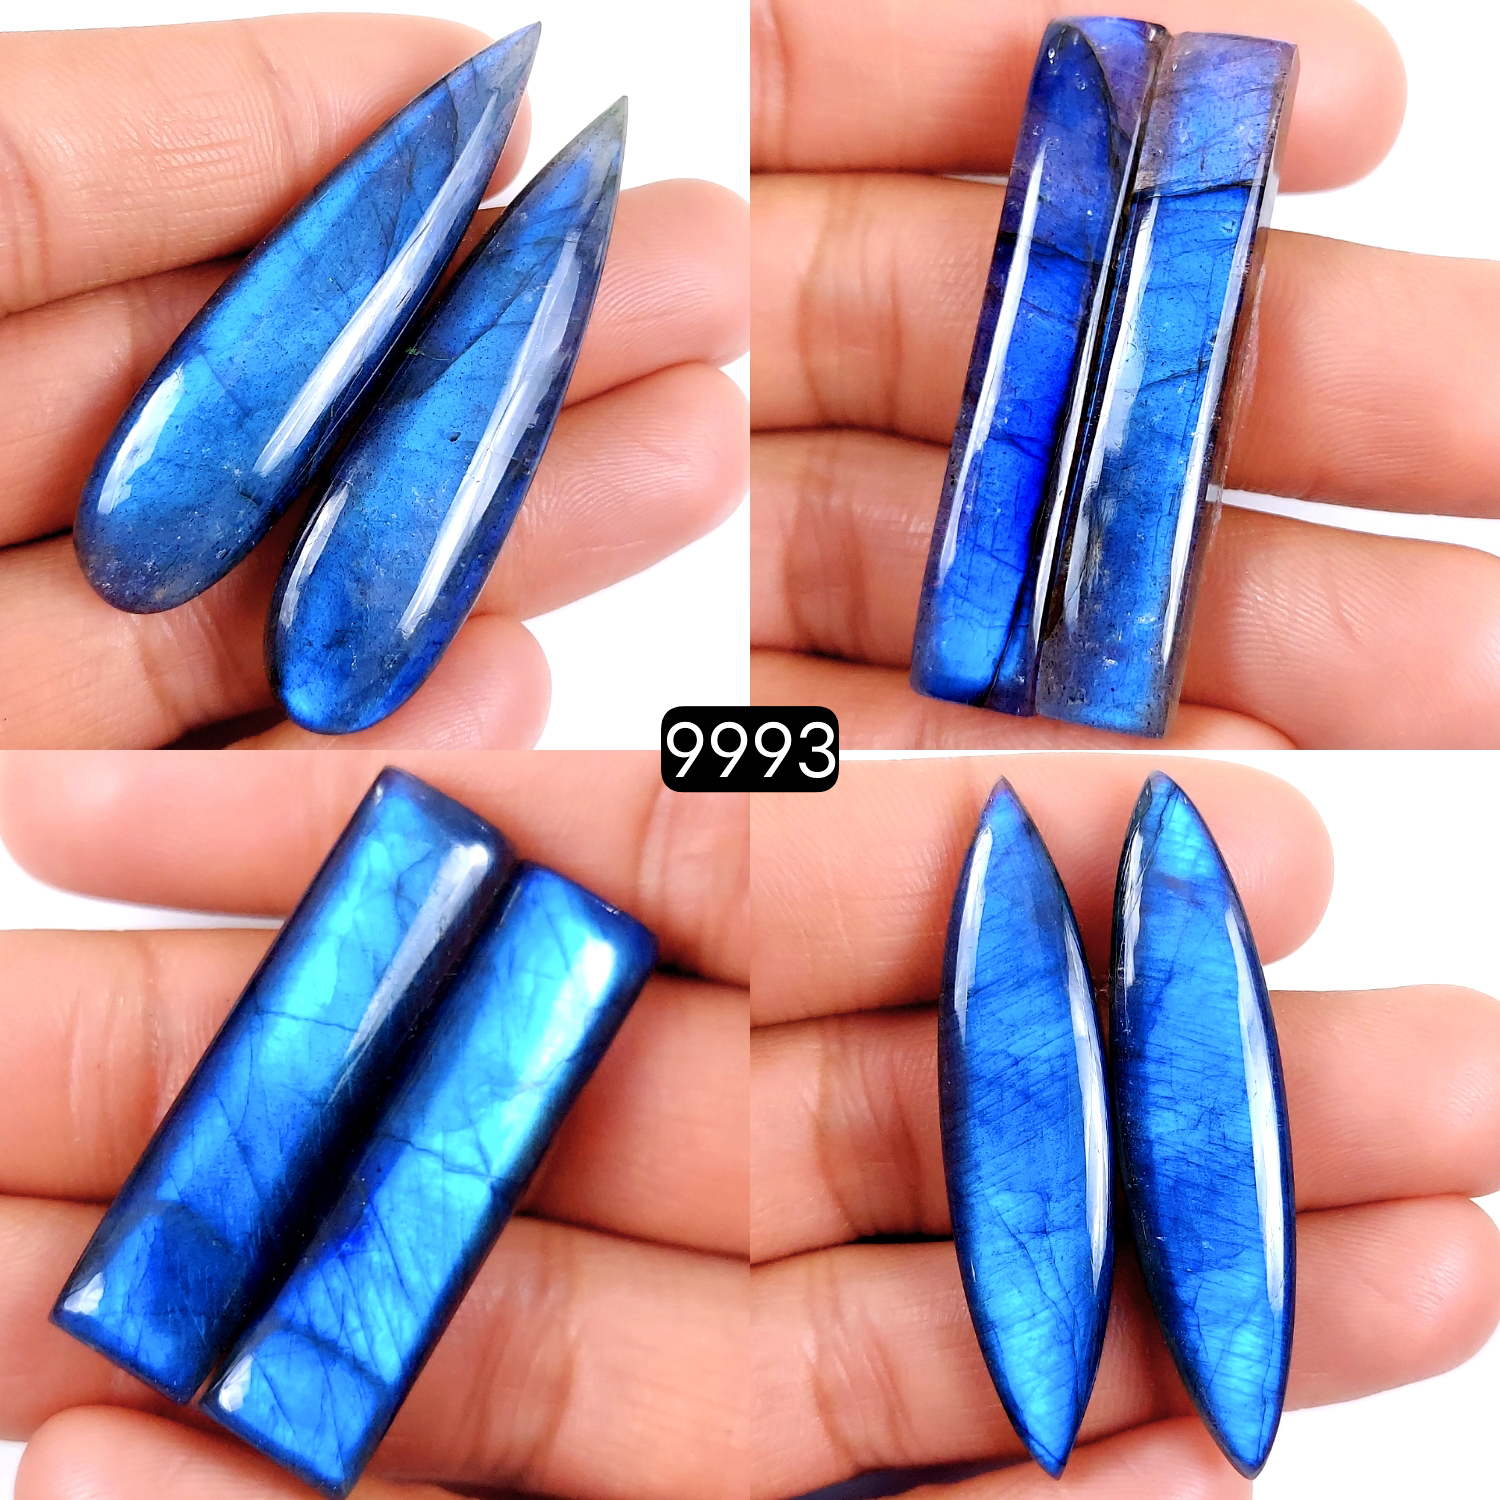 4Pair 239Cts Natural Labradorite Blue Fire Briolette Dangle Drop Earrings Semi Precious Crystal For Hoop Earrings Blue Gemstone Cabochon Matching pair 52x14 40x10mm #9993